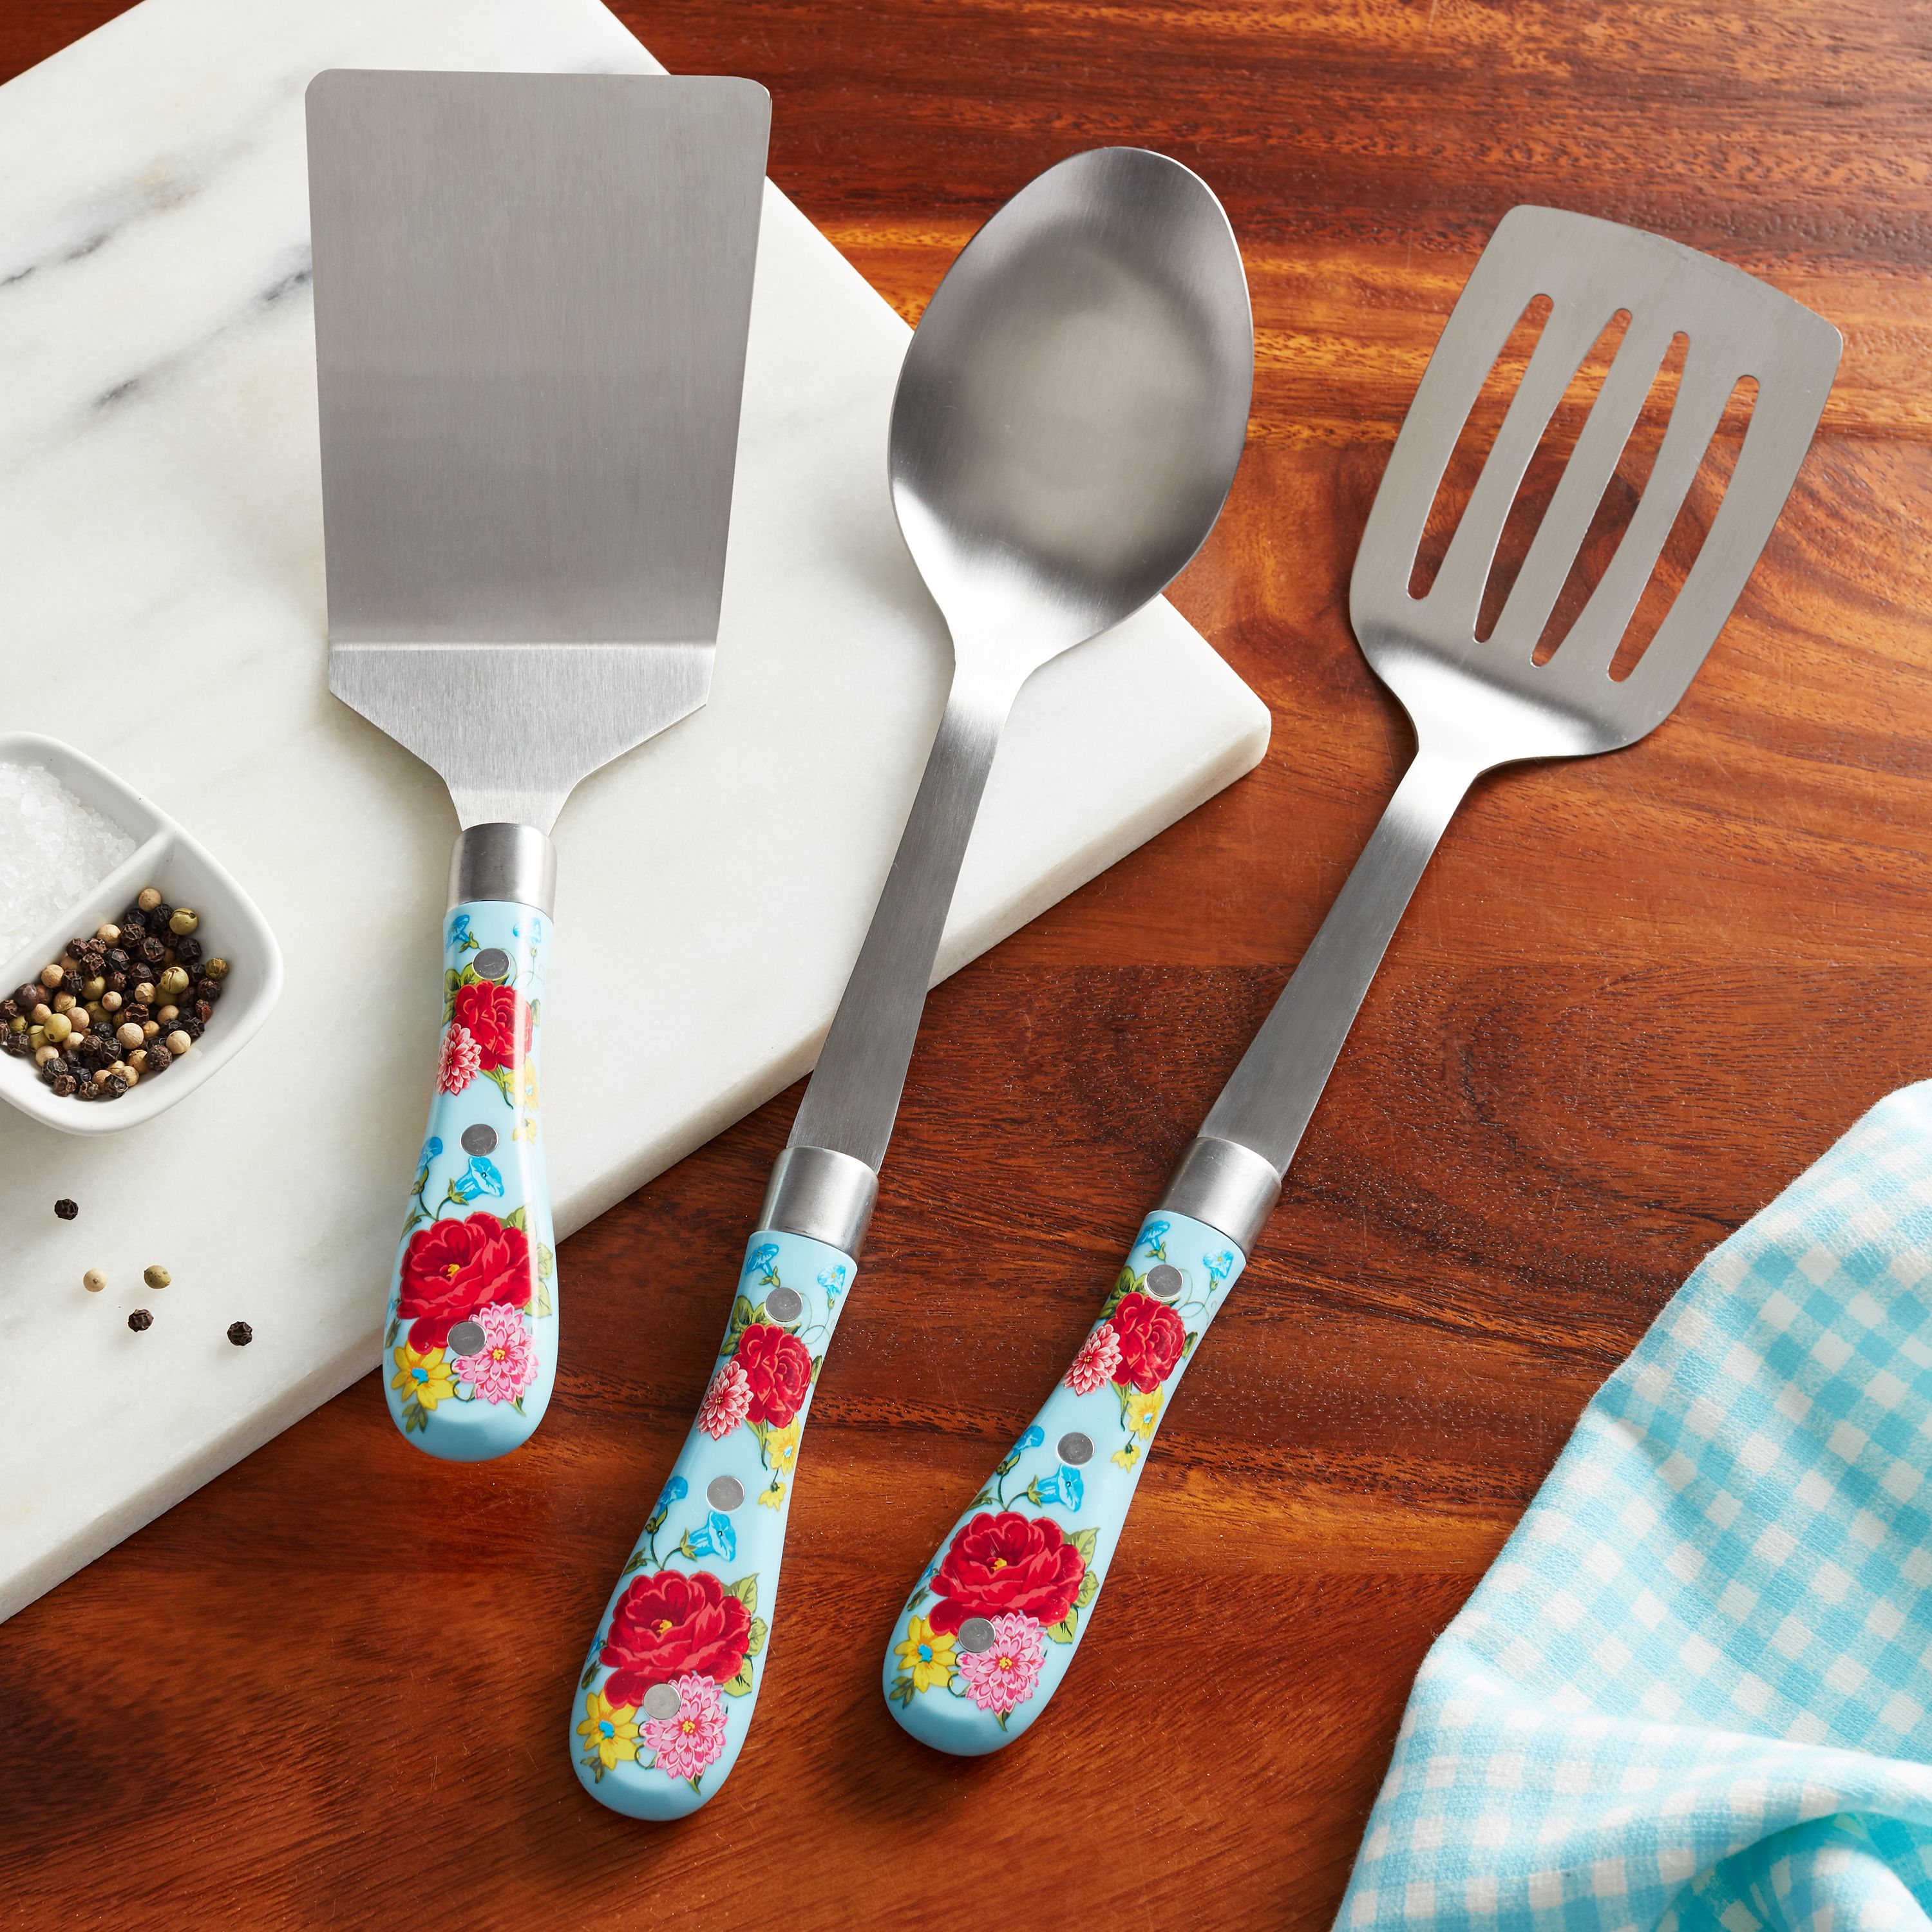 The Pioneer Woman Kitchen Tool Set